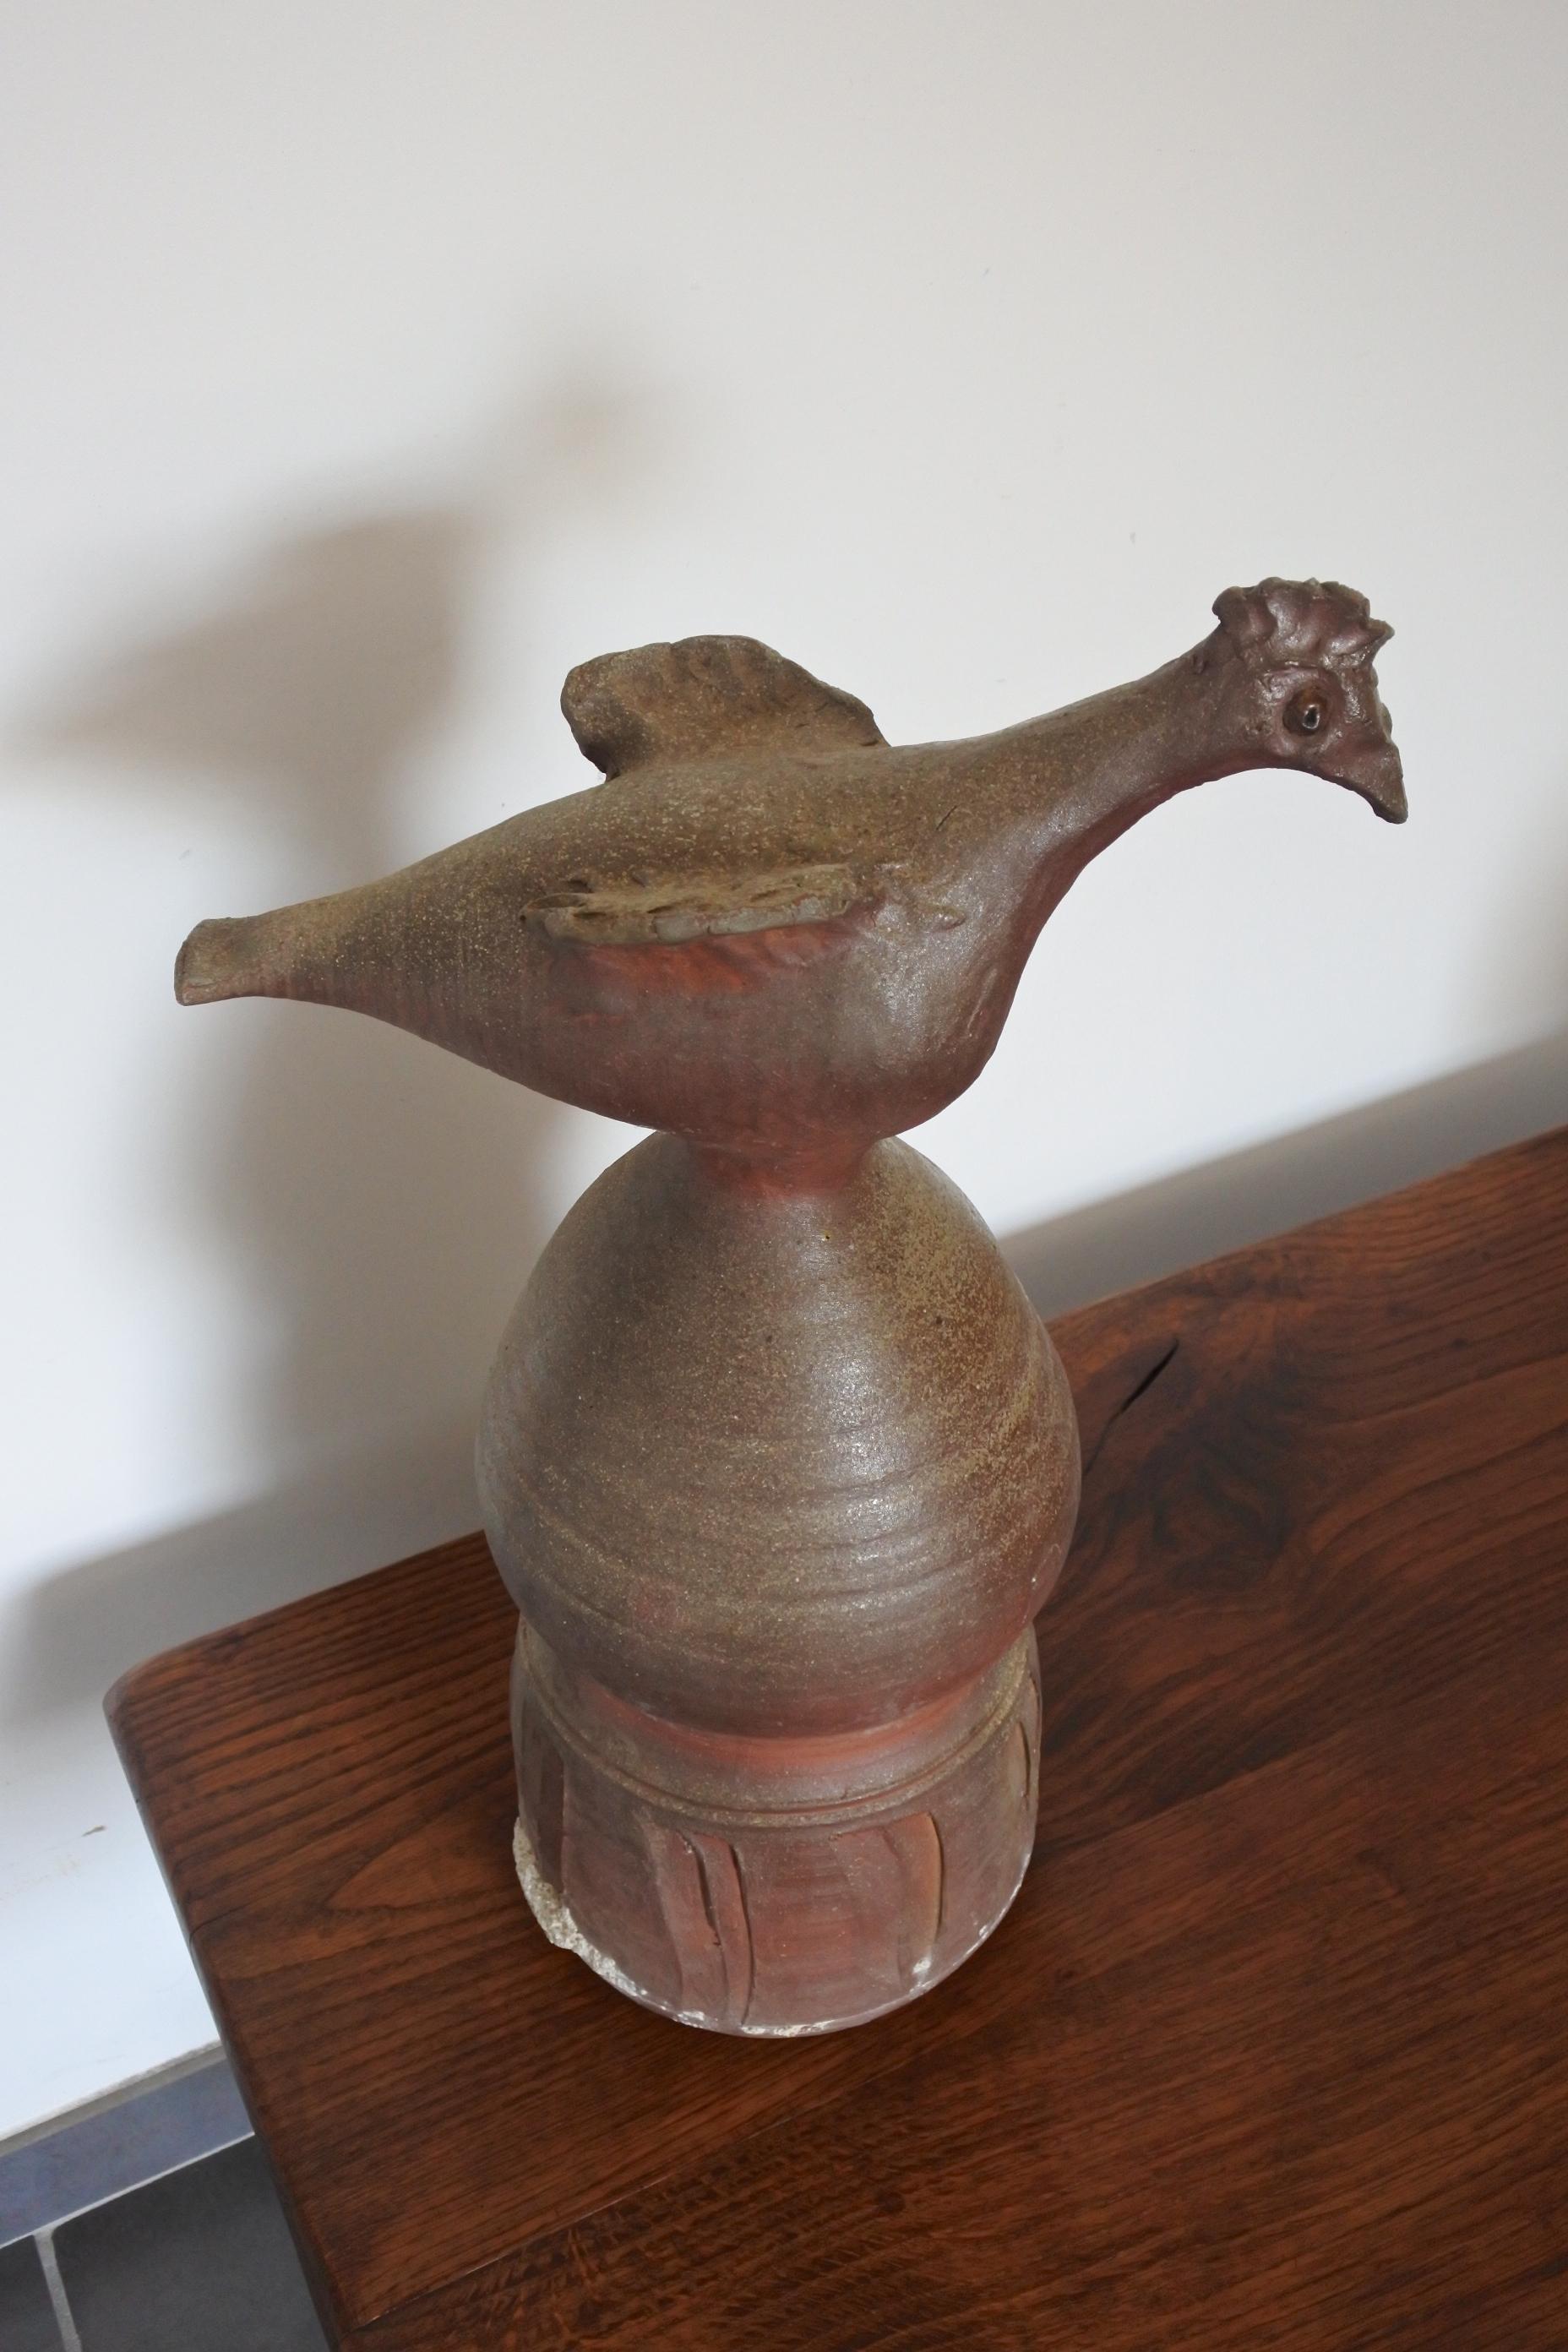 Stoneware roof finial by French pottery artist Jean Michel Doix.
Sculpted bird on a stand.
Made in the region of La Puisaye, renowned pottery centre in France.
The finial was recently taken down the roof it stood on for close to 45